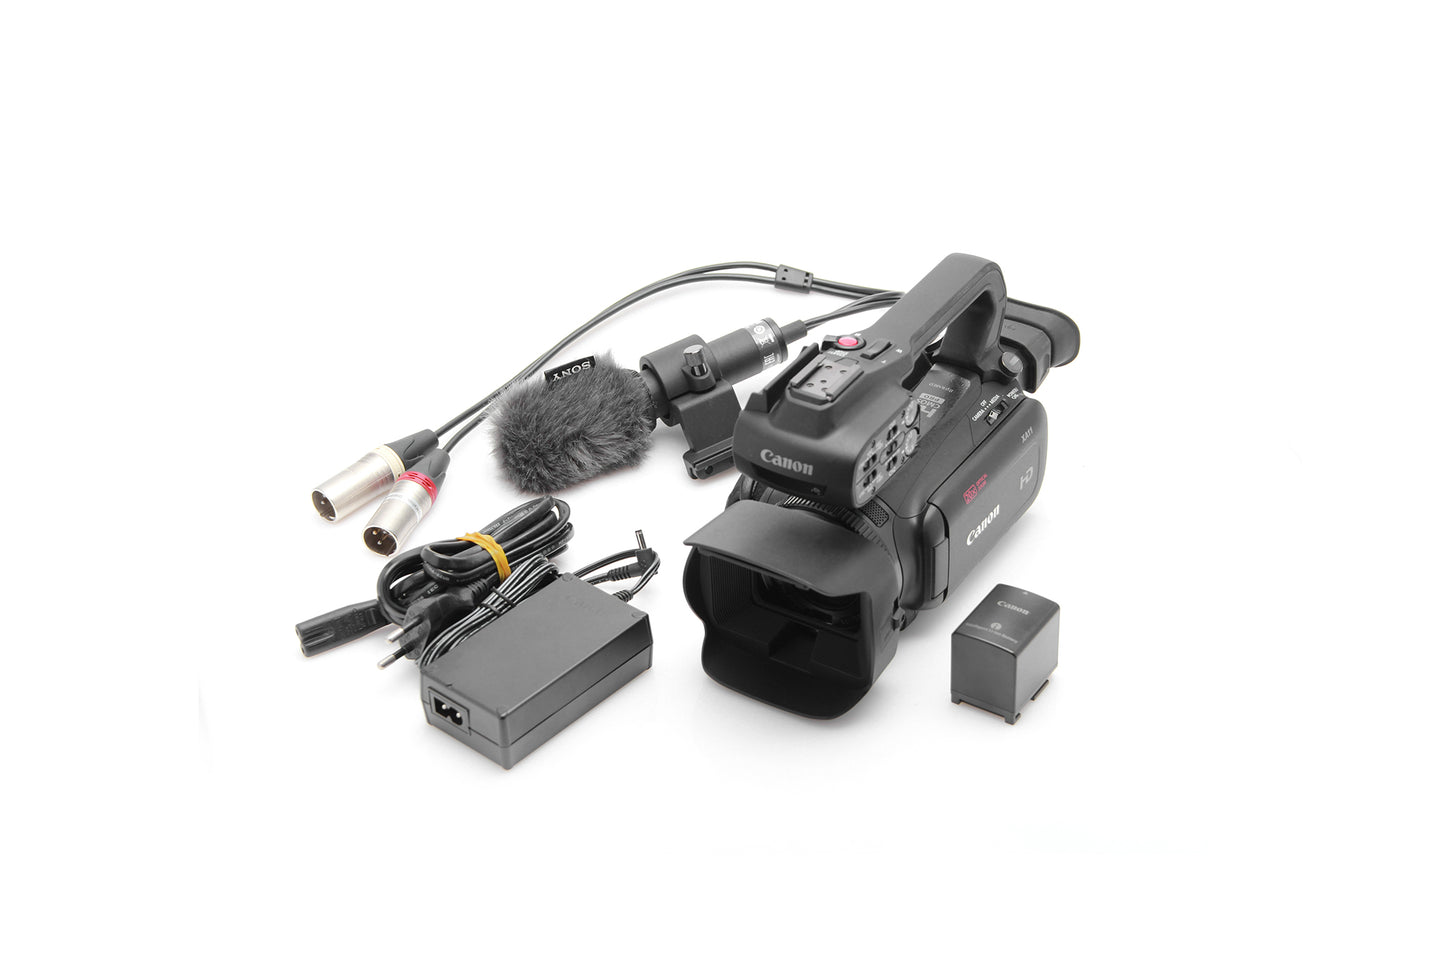 Used Canon XA11 Professional Camcorder With Sony Mic